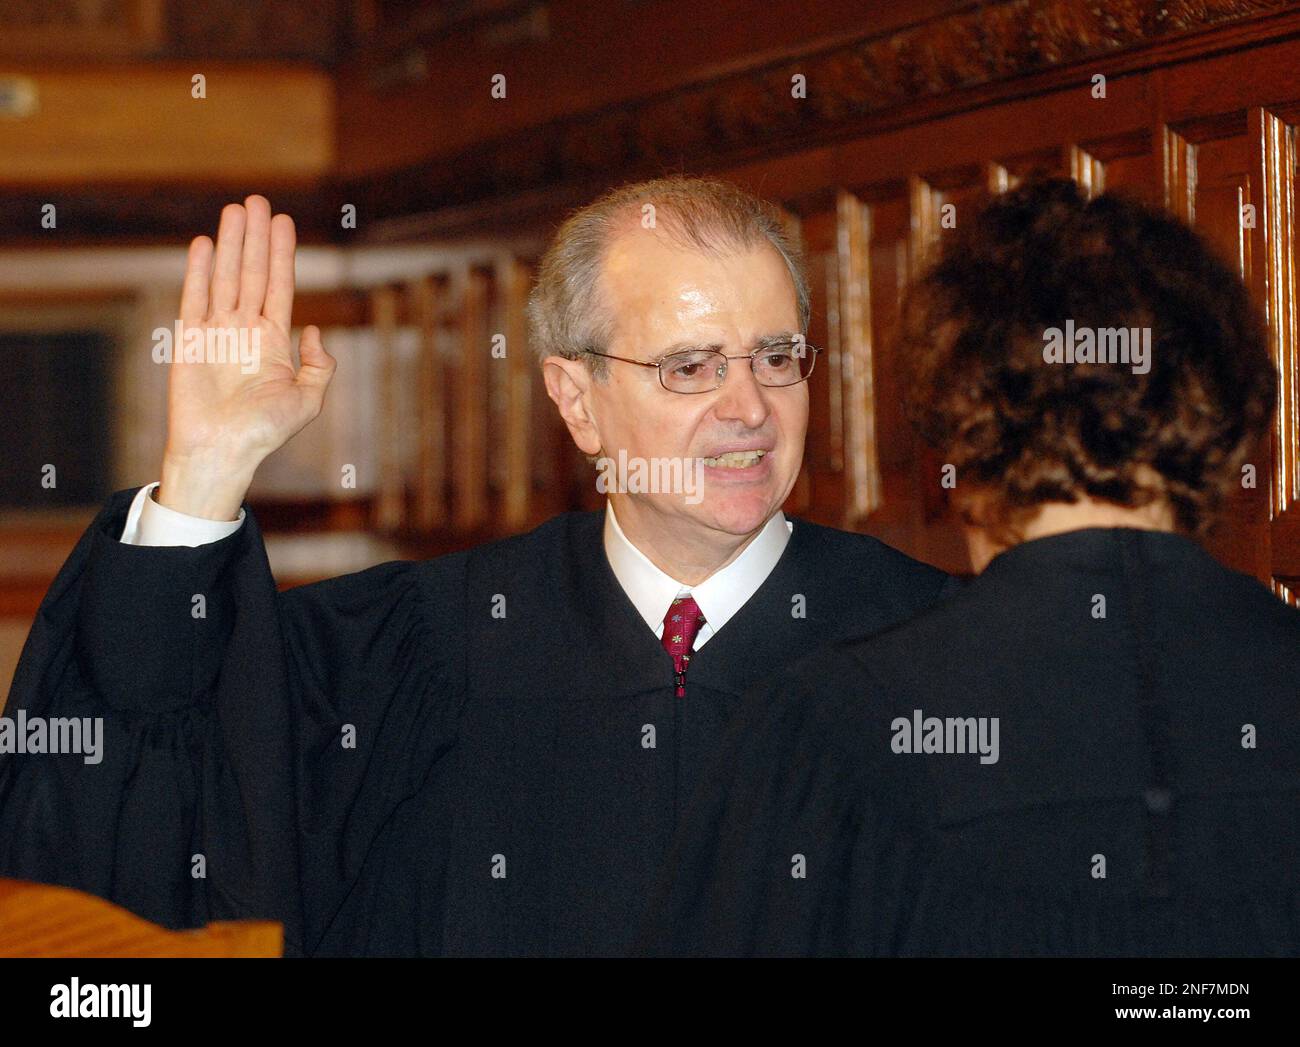 Senior Associate Judge Carmen Beauchamp Cirparick swears-in Judge Jonathan  Lippman ,left, as the state's new chief judge during a swearing-in ceremony  at the New York State Court of Appeals in Albany, N.Y.